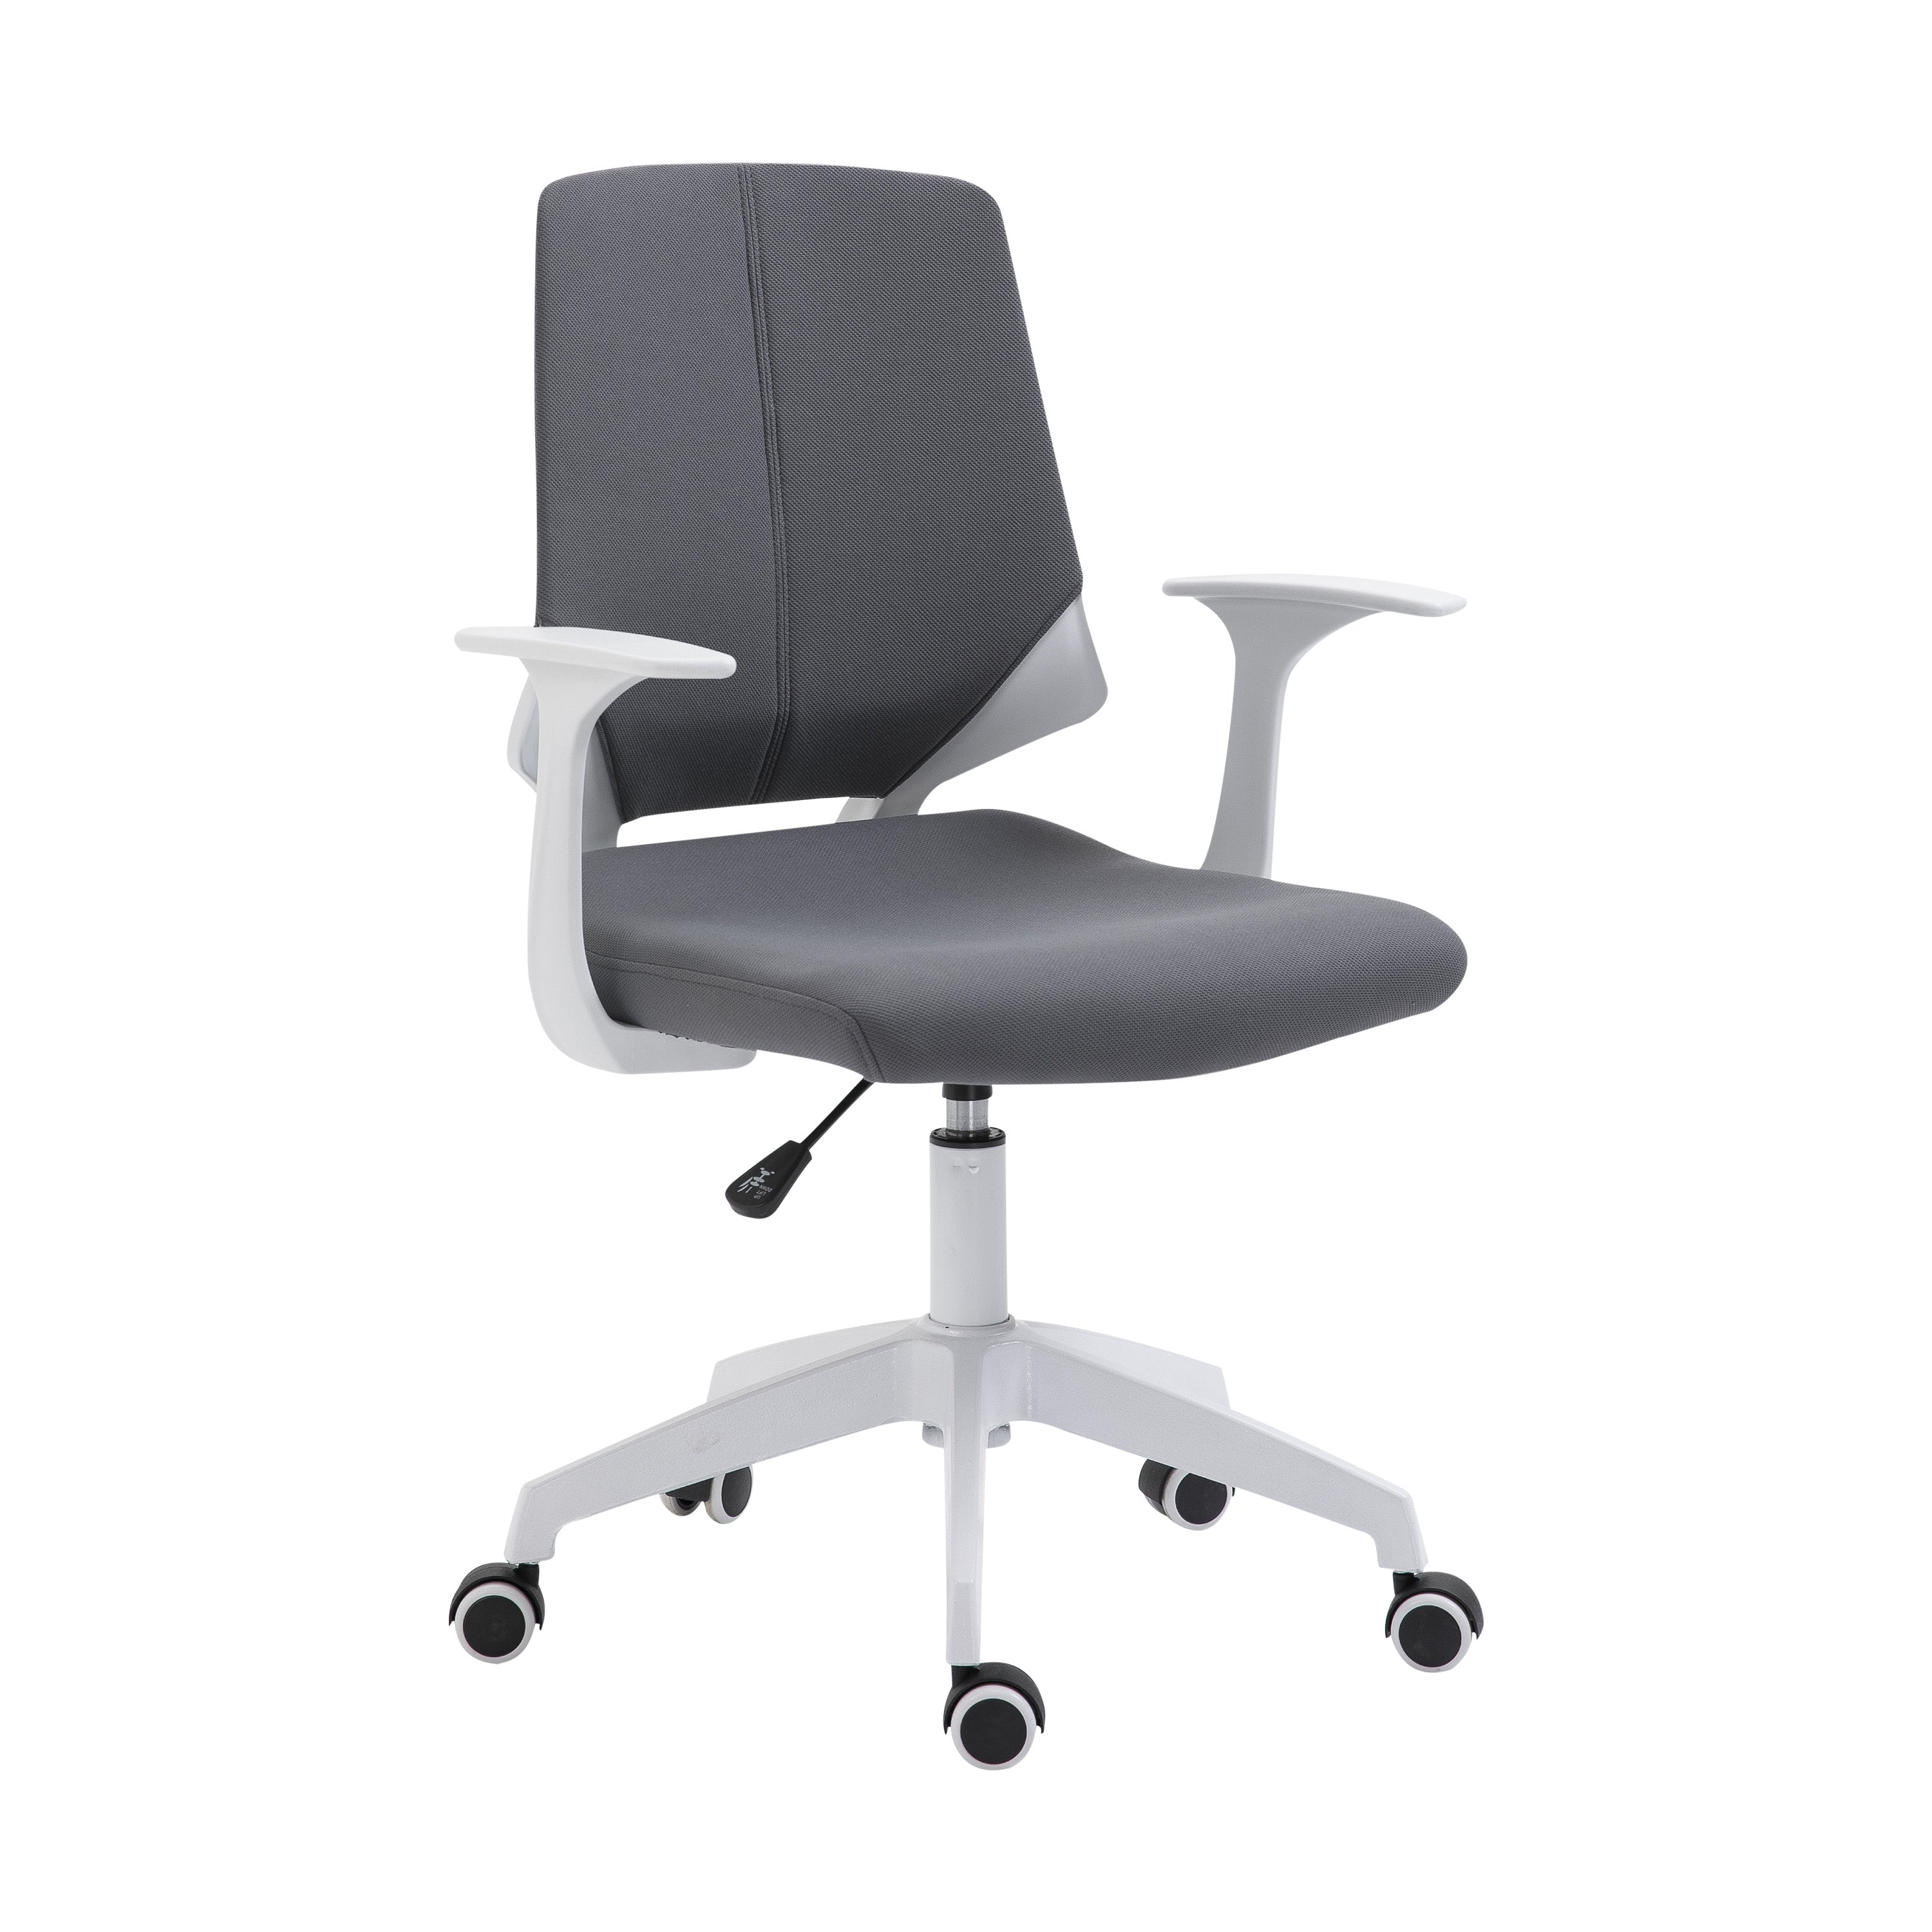 Height Adjustable Mid Back Office Chair Techni Mobili